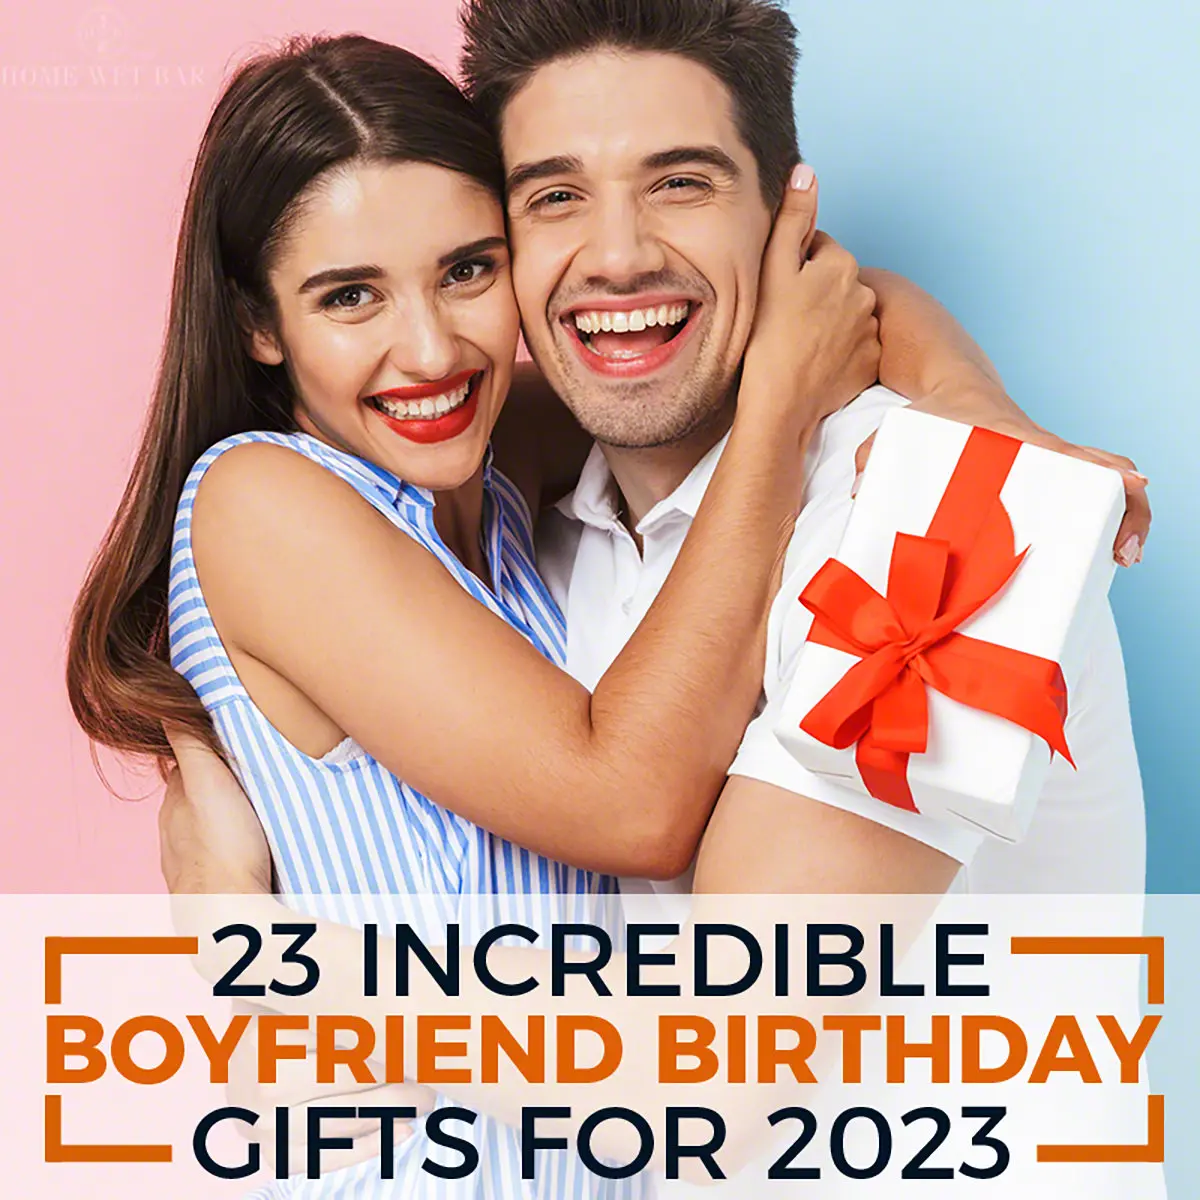 Top 7 Birthday Gift For Boyfriend - Gifting Ideas by Tring-sonthuy.vn